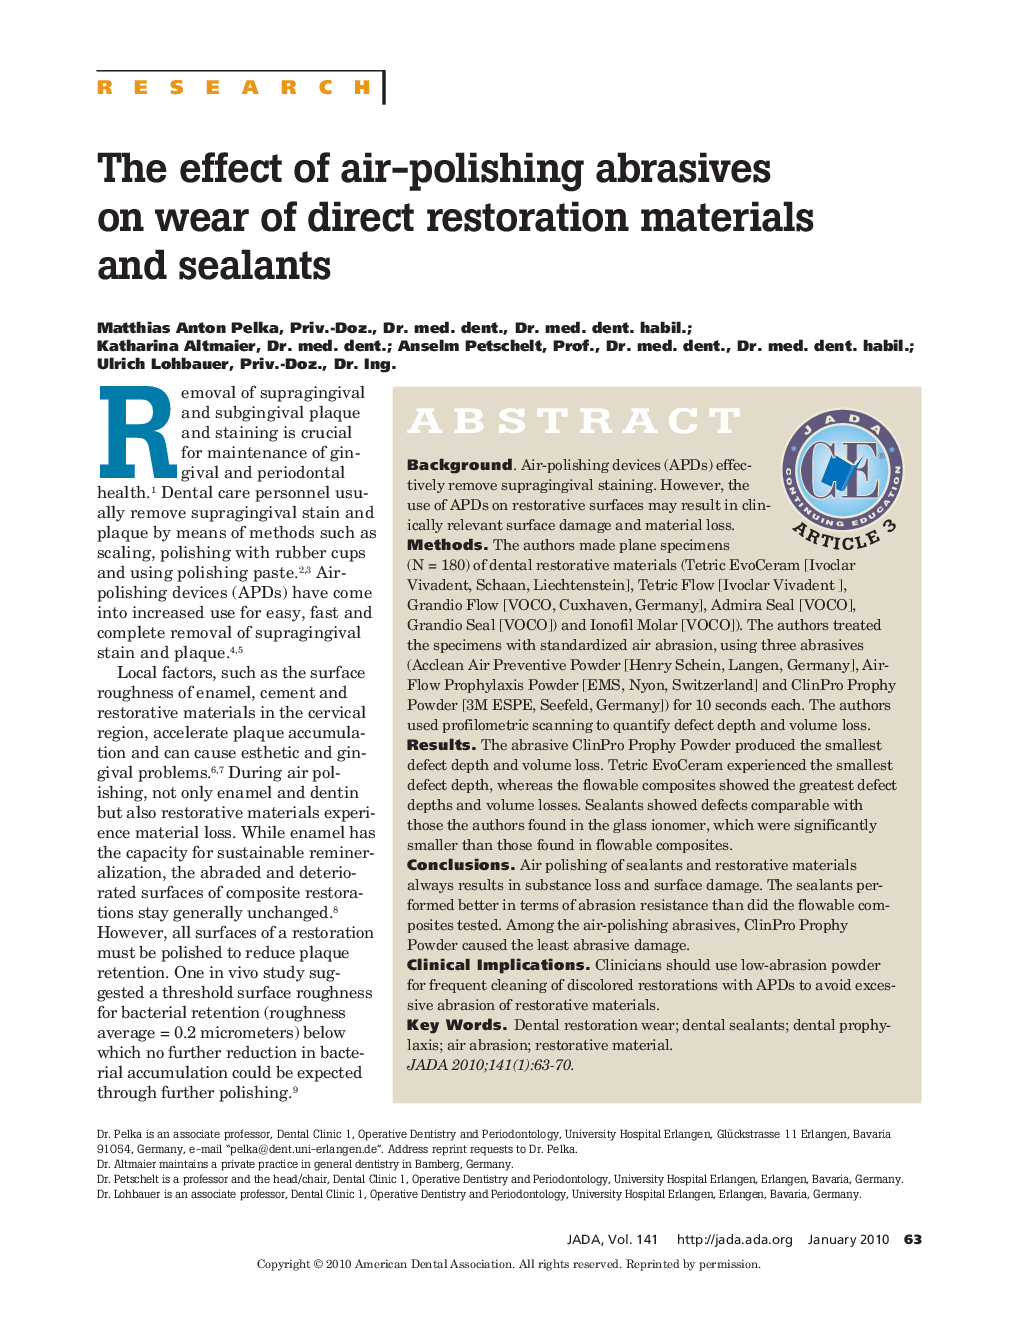 The effect of air-polishing abrasives on wear of direct restoration materials and sealants 